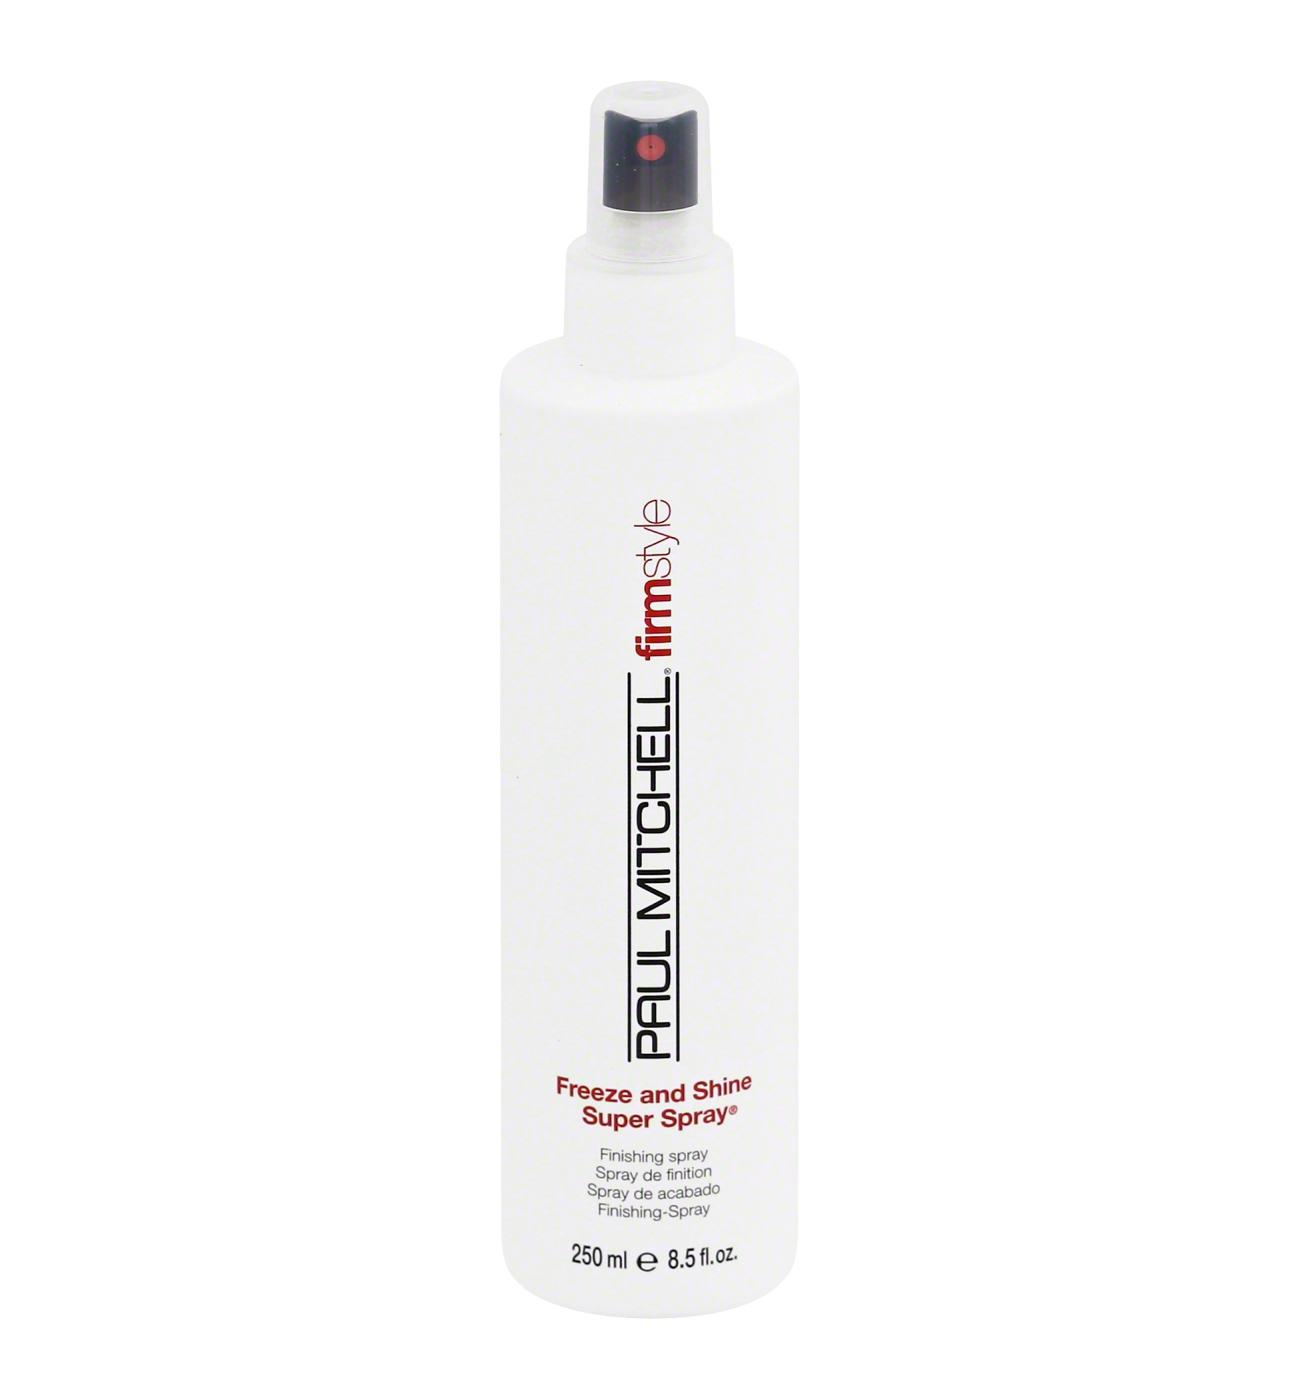 Paul Mitchell Firm Style Freeze And Shine Super Spray; image 1 of 2